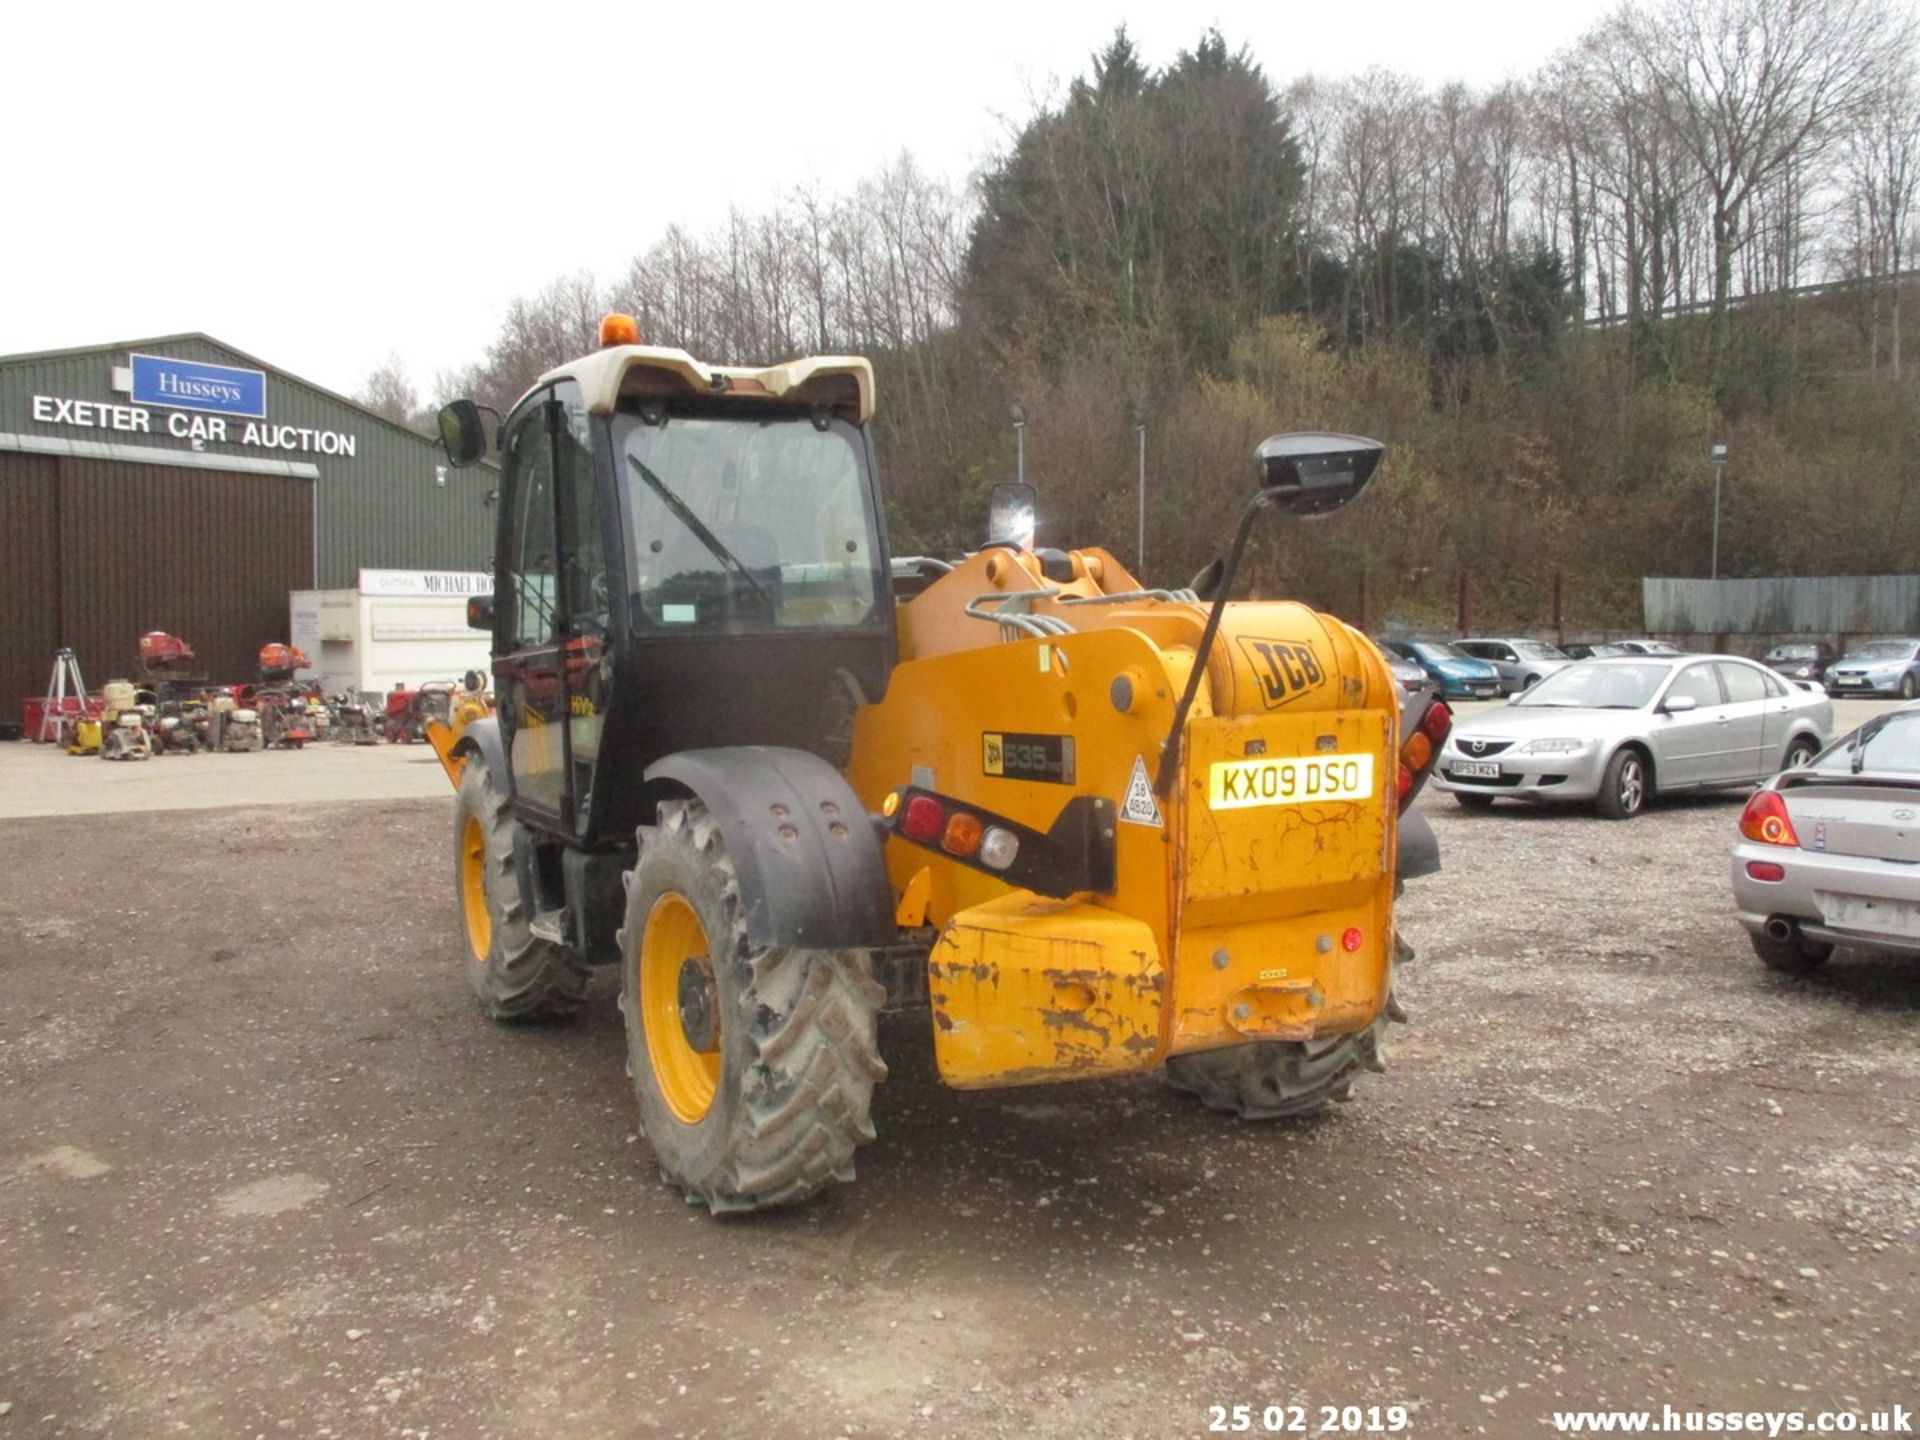 JCB 535-140 TELEHANDLER (YR2009)(MANUFACTURE 2008) 6834HRS SHOWING 2 OWNERS FROM NEW V5 & MANUALS - Image 5 of 10